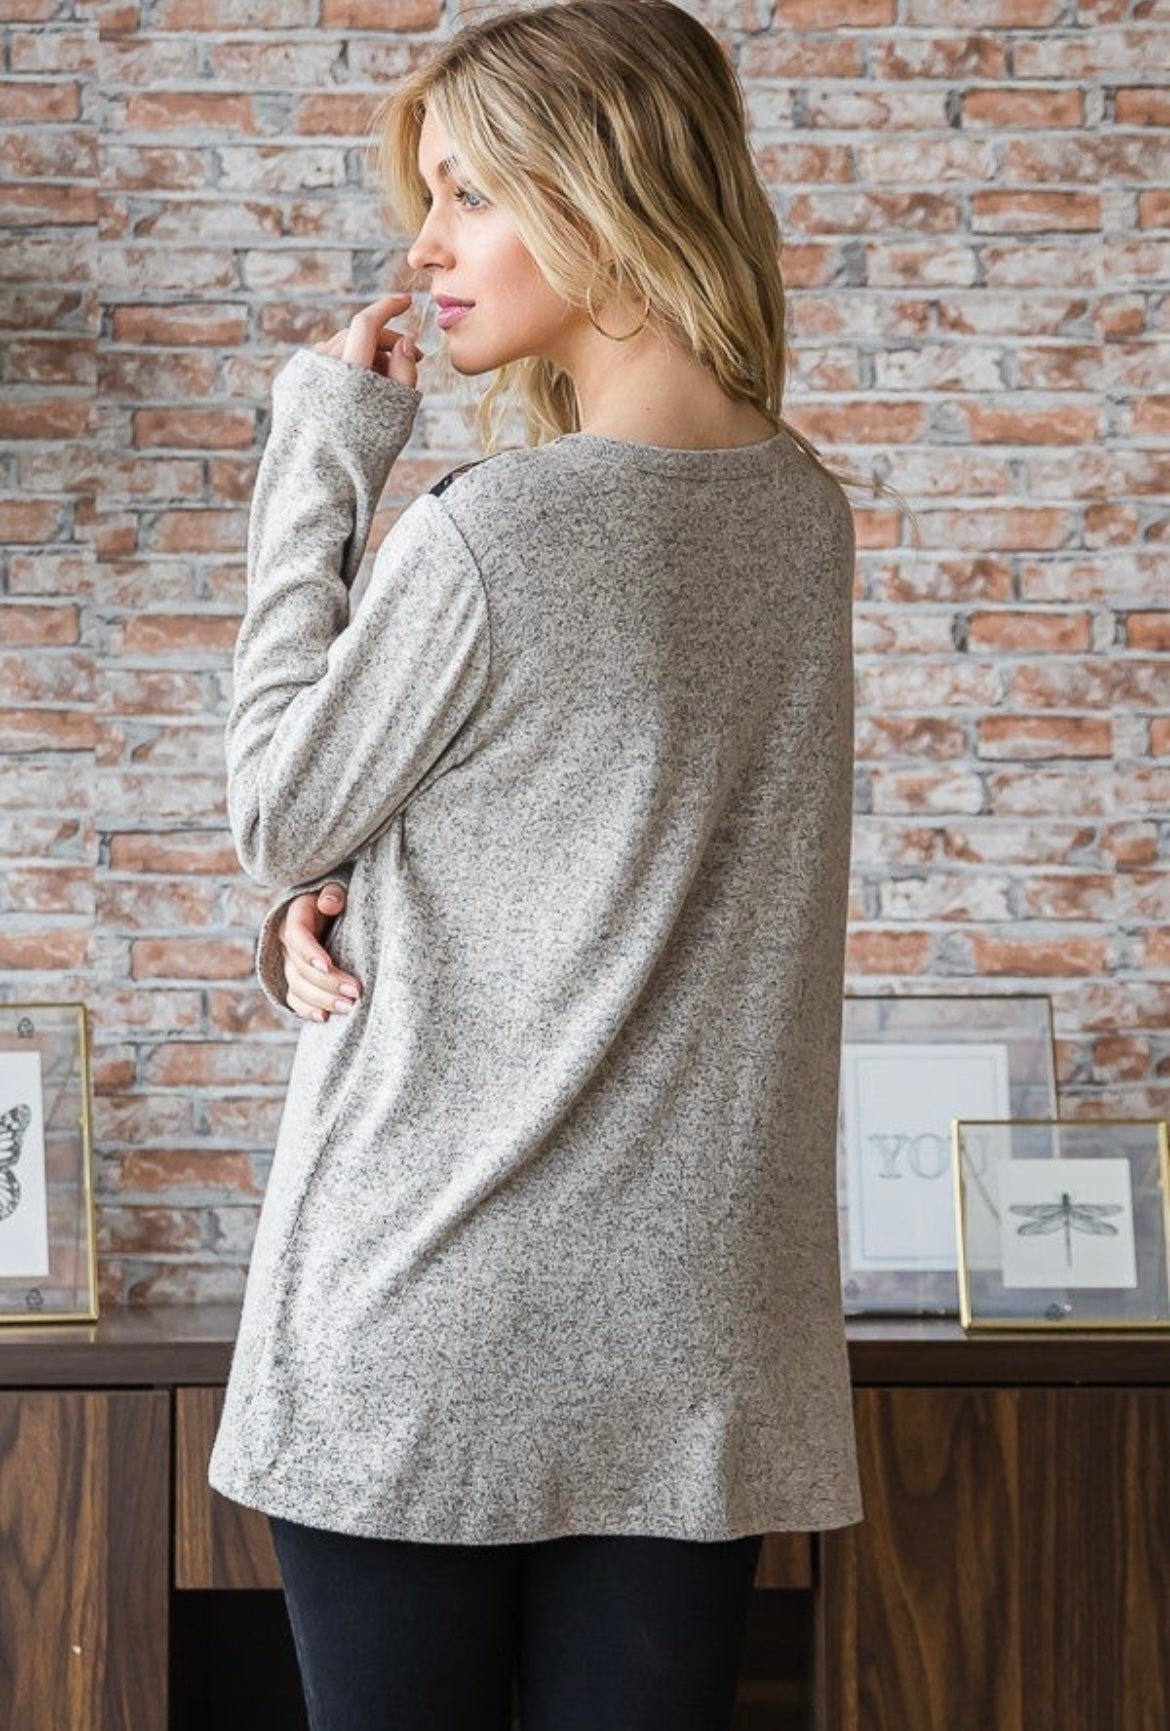 Oatmeal Long Sleeve with Lace Chest